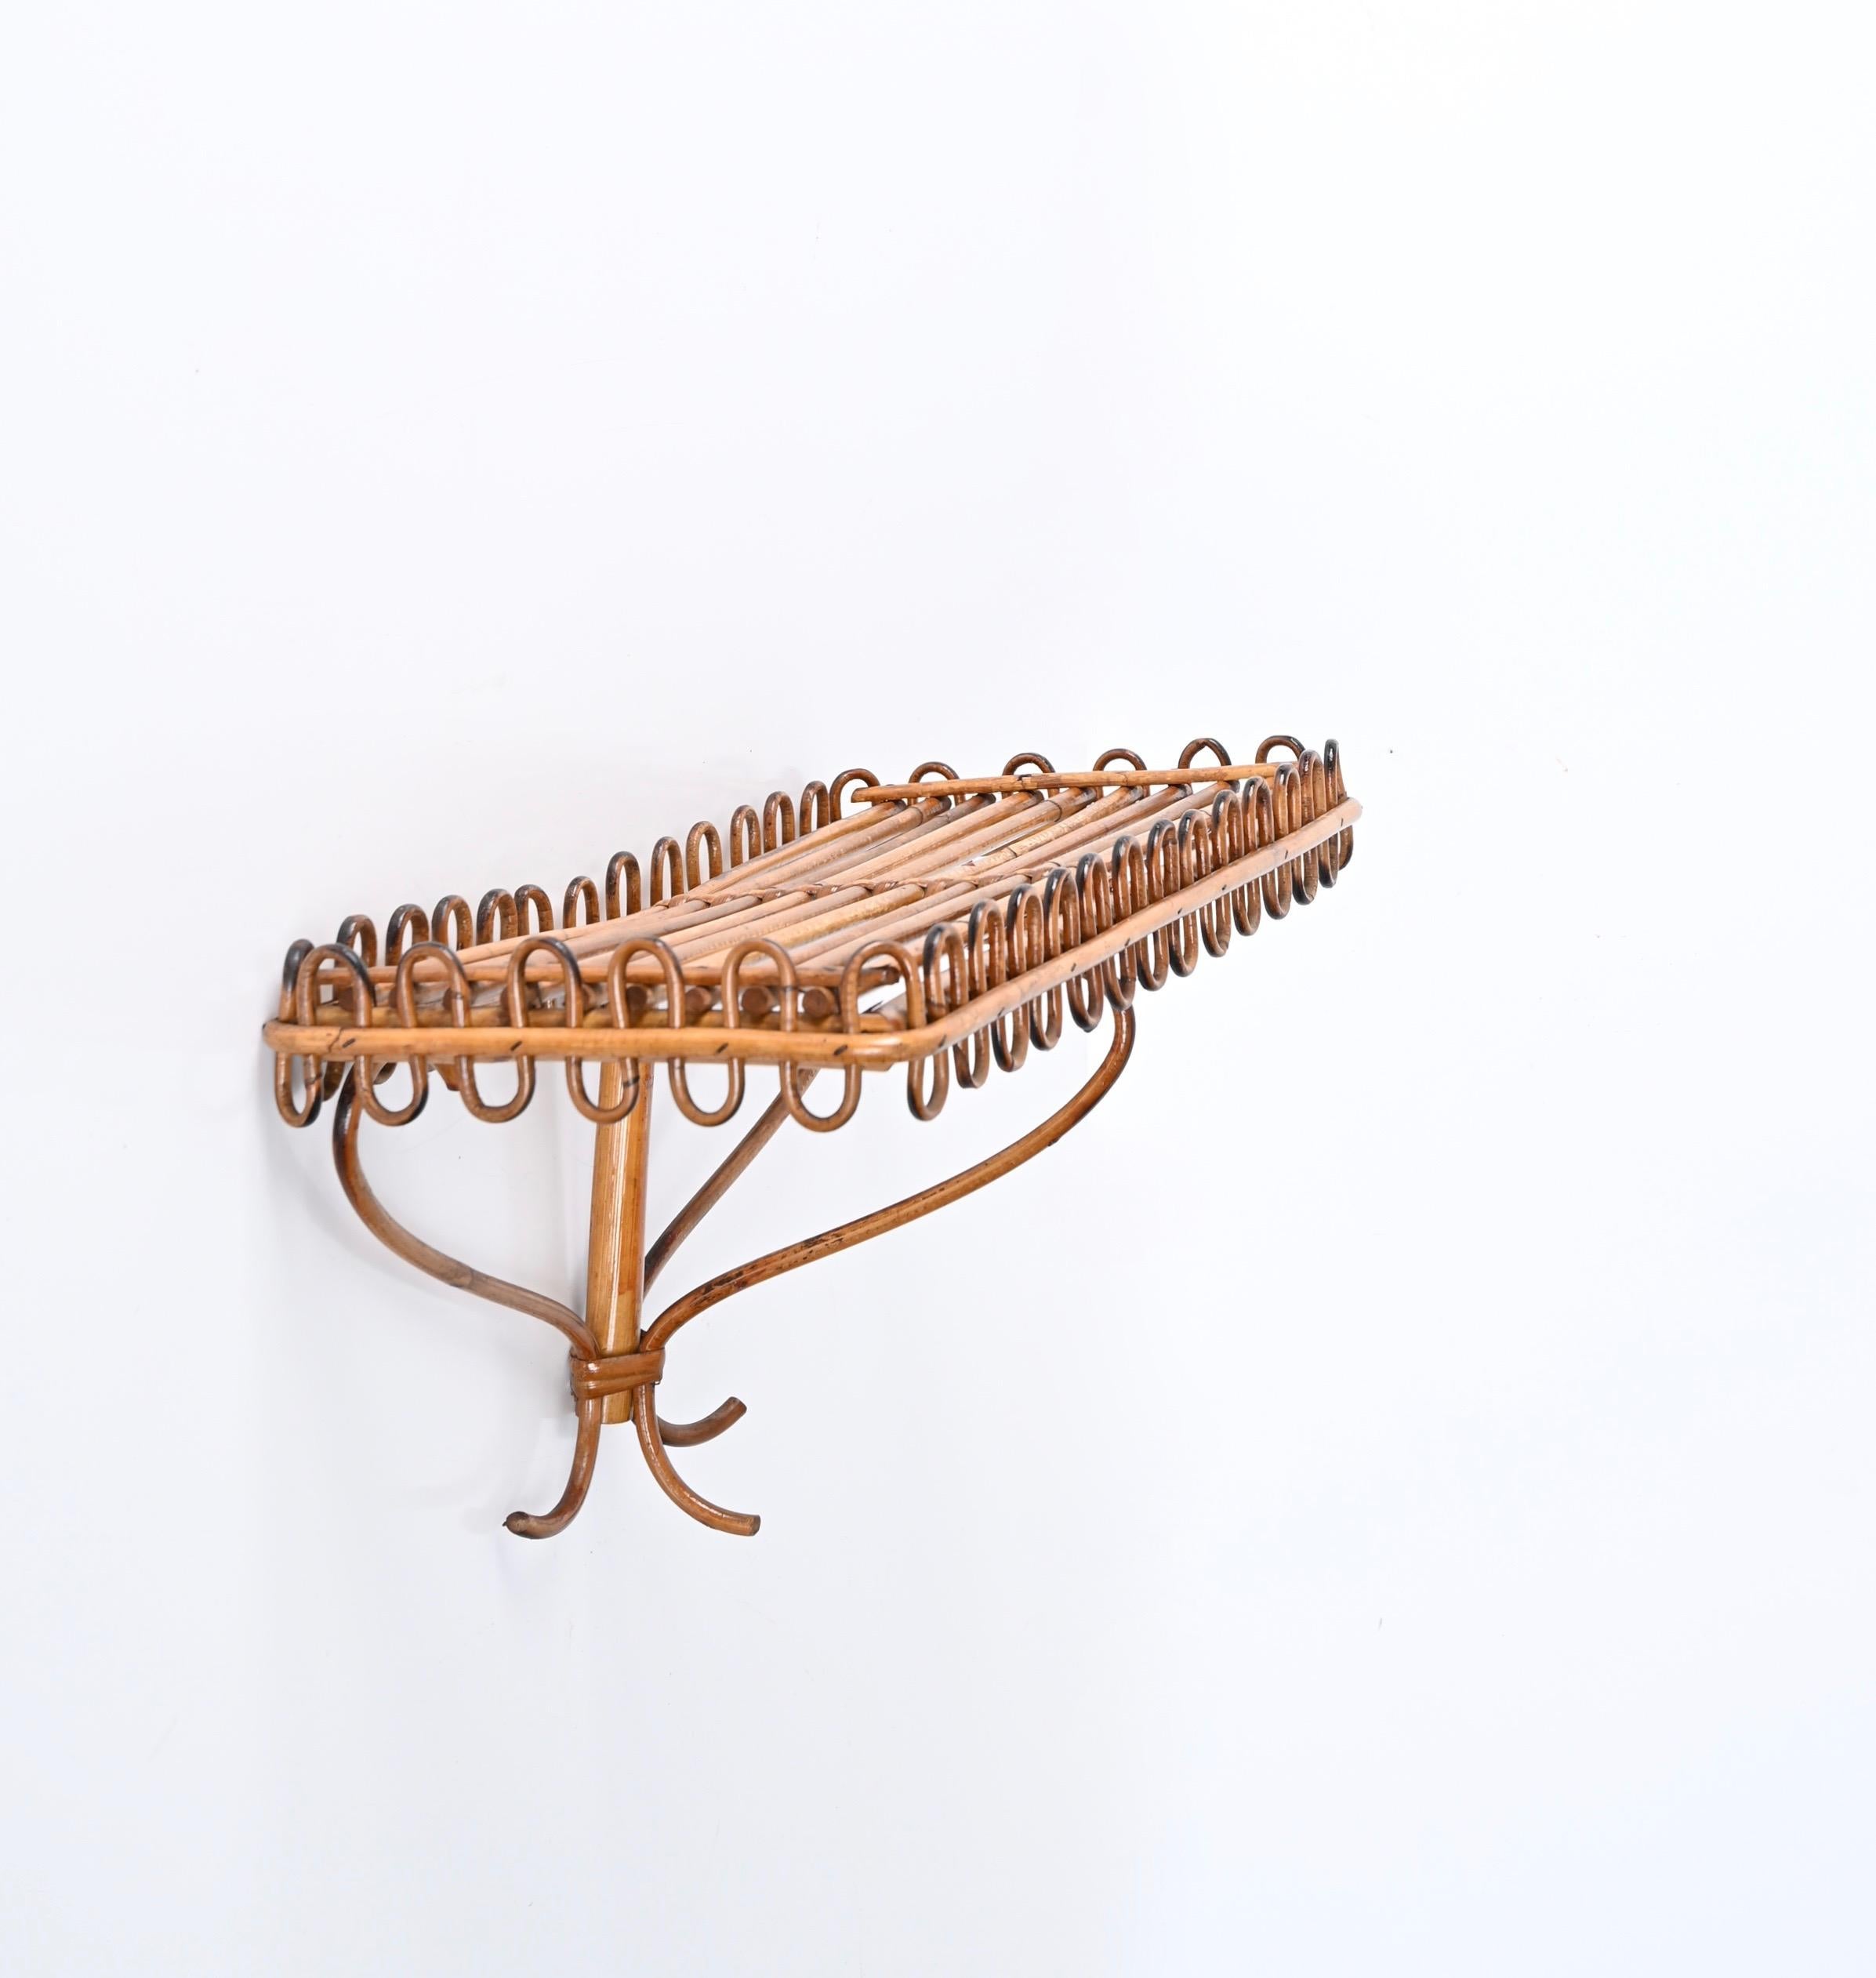 Midcentury Rattan and Bamboo Wall Shelf or Console, Franco Albini, Italy, 1960s For Sale 5